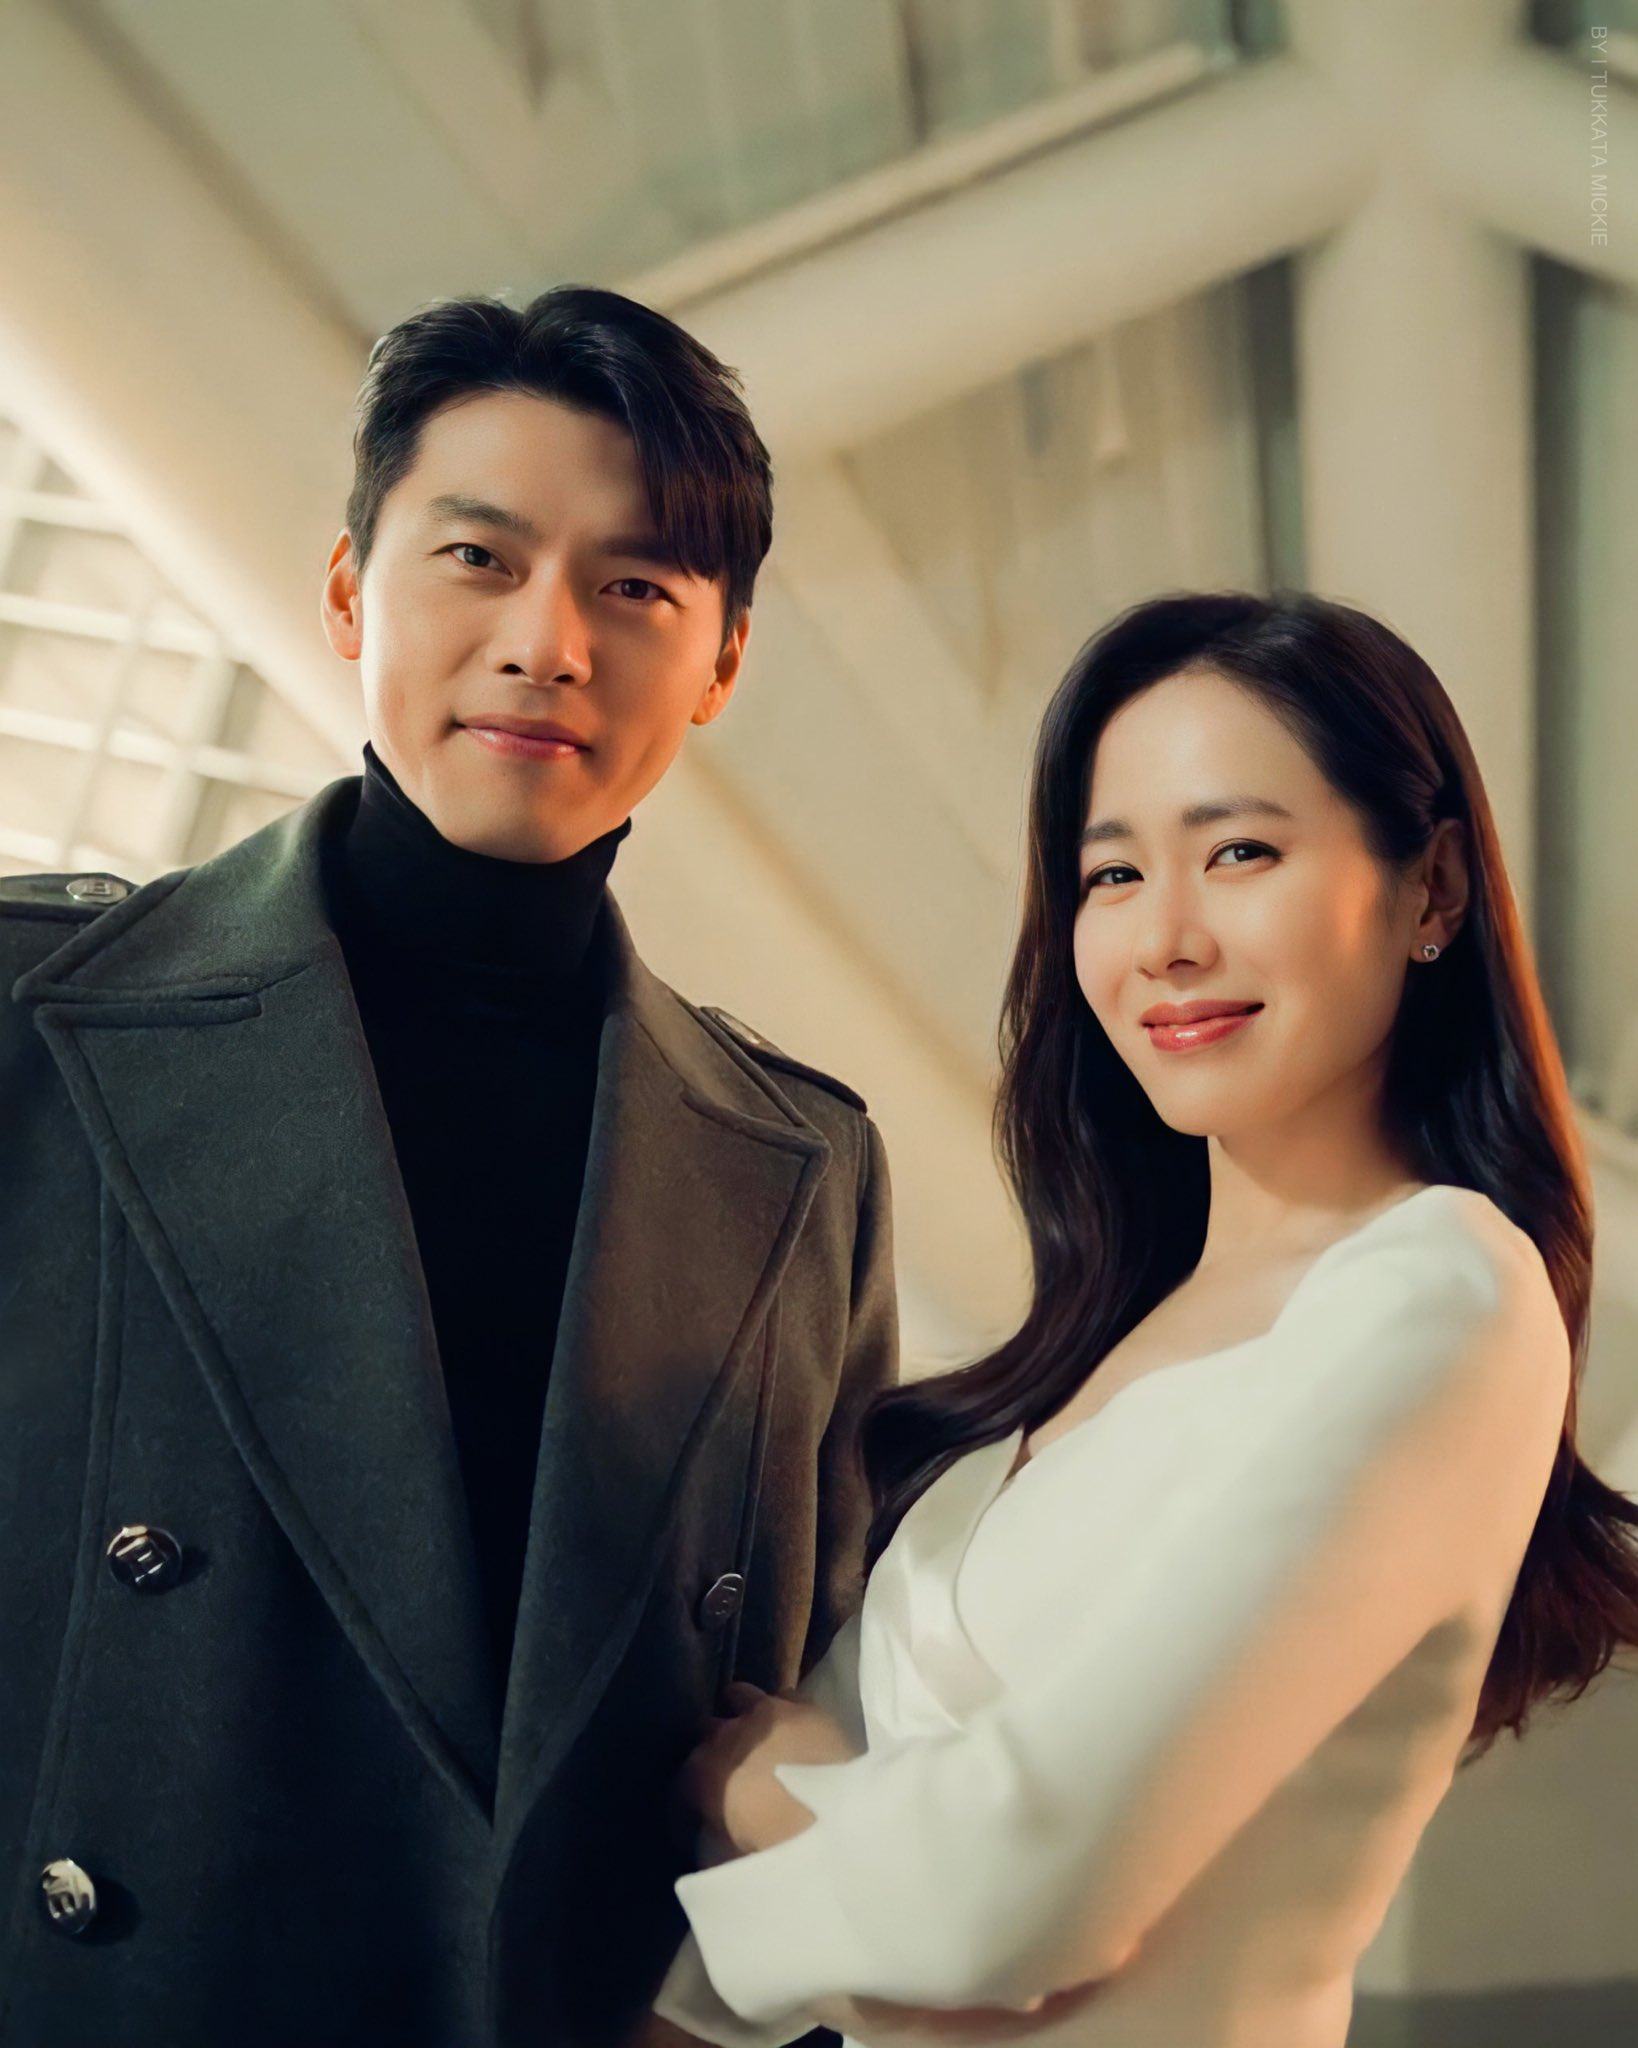 Are Crash Landing On You S Son Ye Jin And Hyun Bin Getting Married 4 Clues That Suggest They Might Be From Cleared Schedules And A Potential Marital Penthouse To Domestic New Instagram Snaps